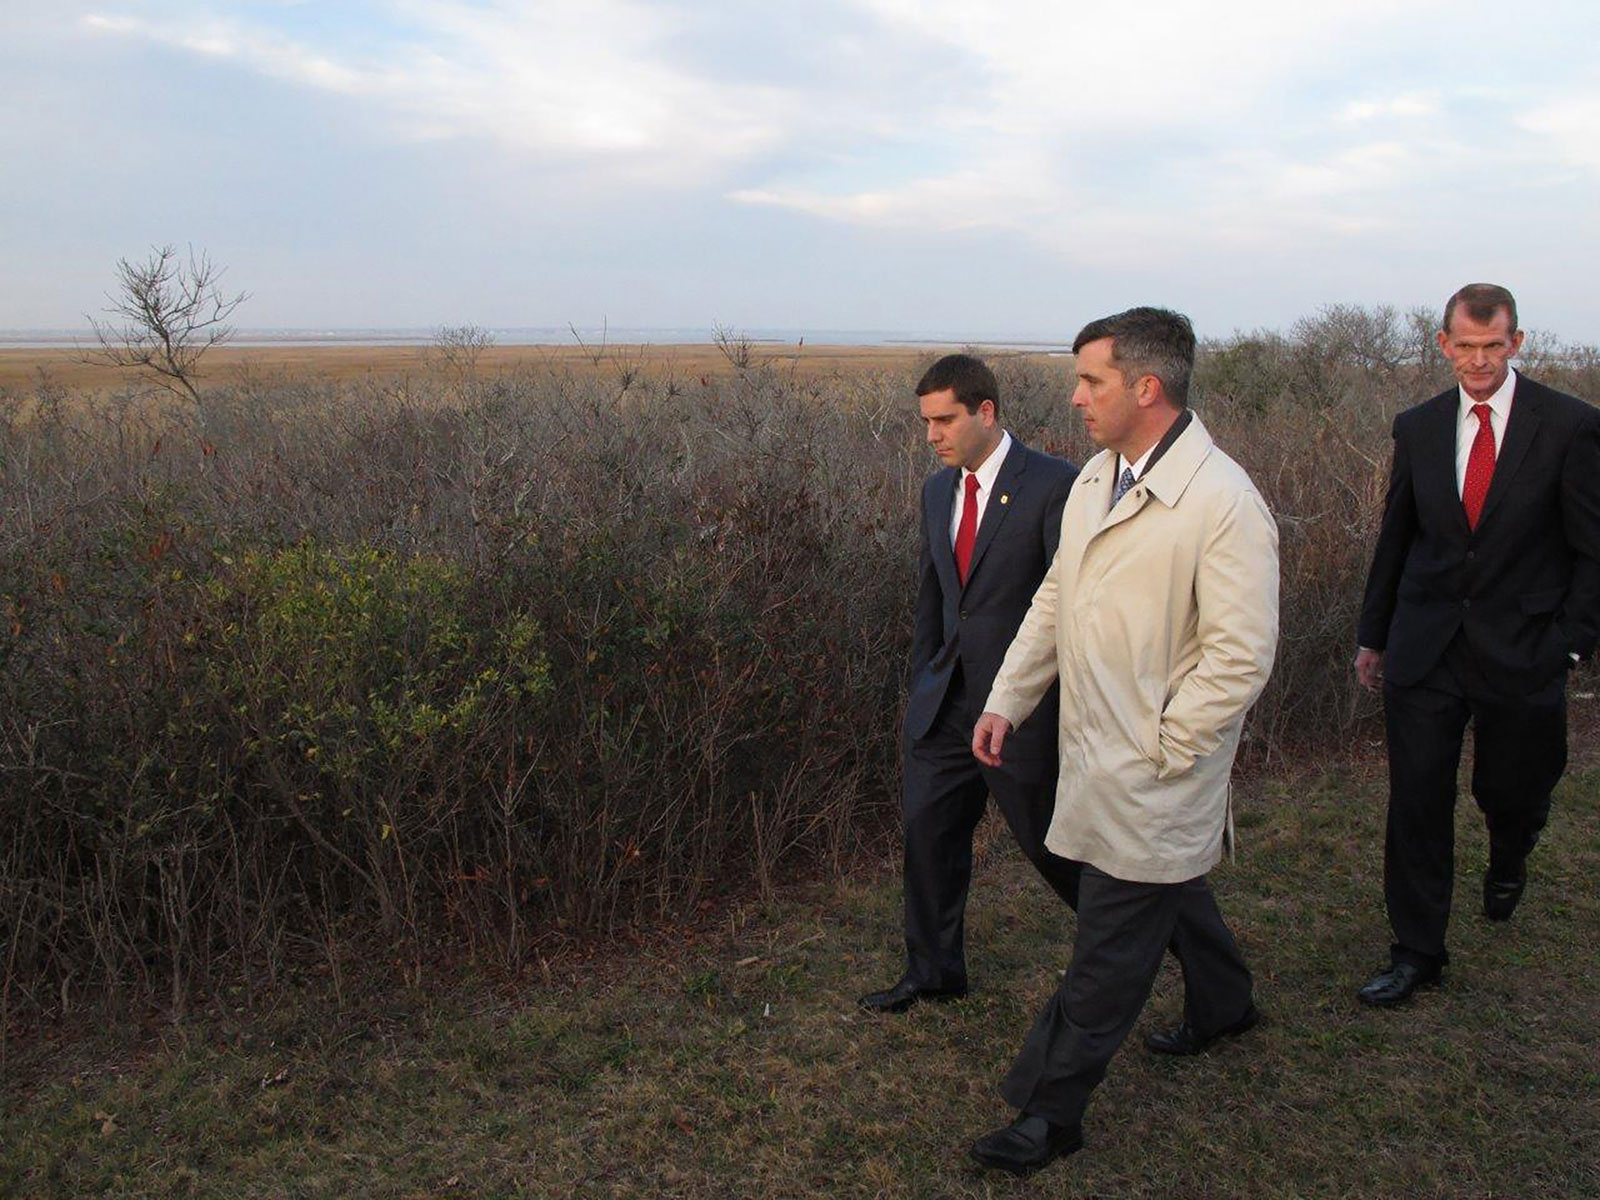 Deputy Suffolk County Police Commissioner Tim Sini, left, homicide Detective Lt. Kevin Beyrer, center, and Chief of Department Stuart Cameron tour a remote area off a Long Island parkway in December 2015 where the bodies of 10 people were discovered in 2010 and 2011, in Babylon, New York. 